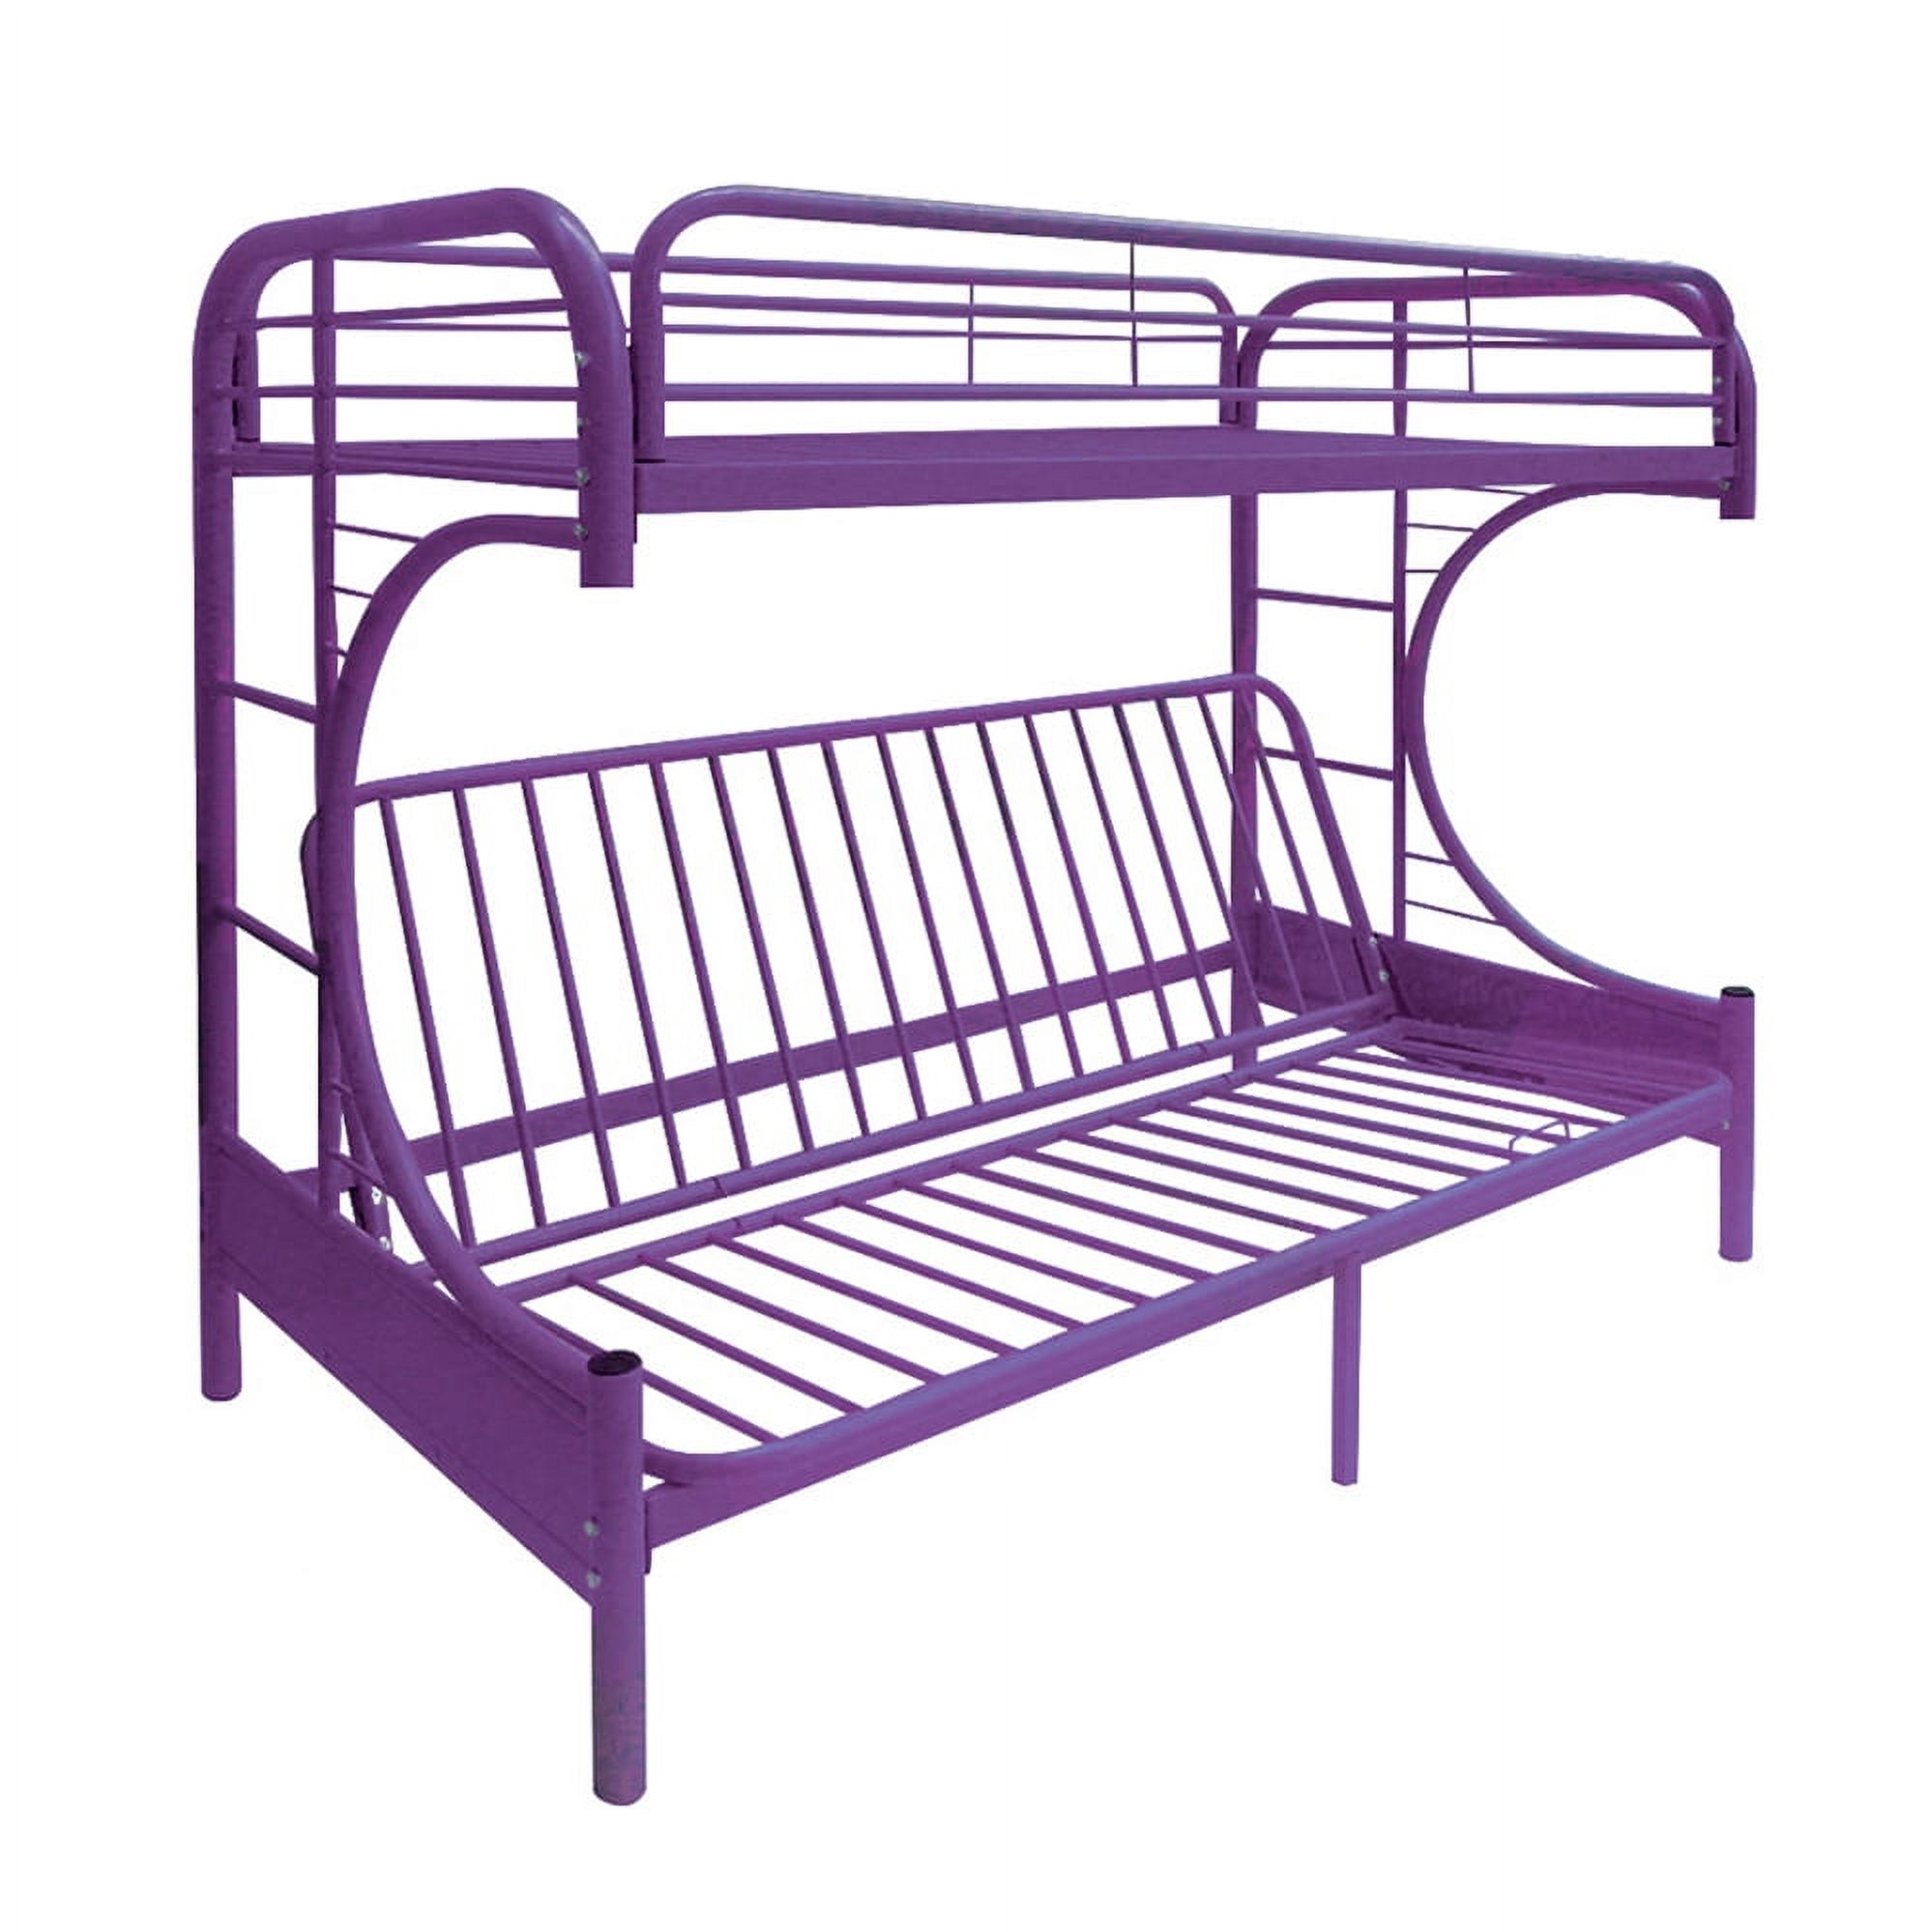 ACME Furniture Eclipse Twin over Full and Futon Bunk Bed in Purple - image 1 of 5